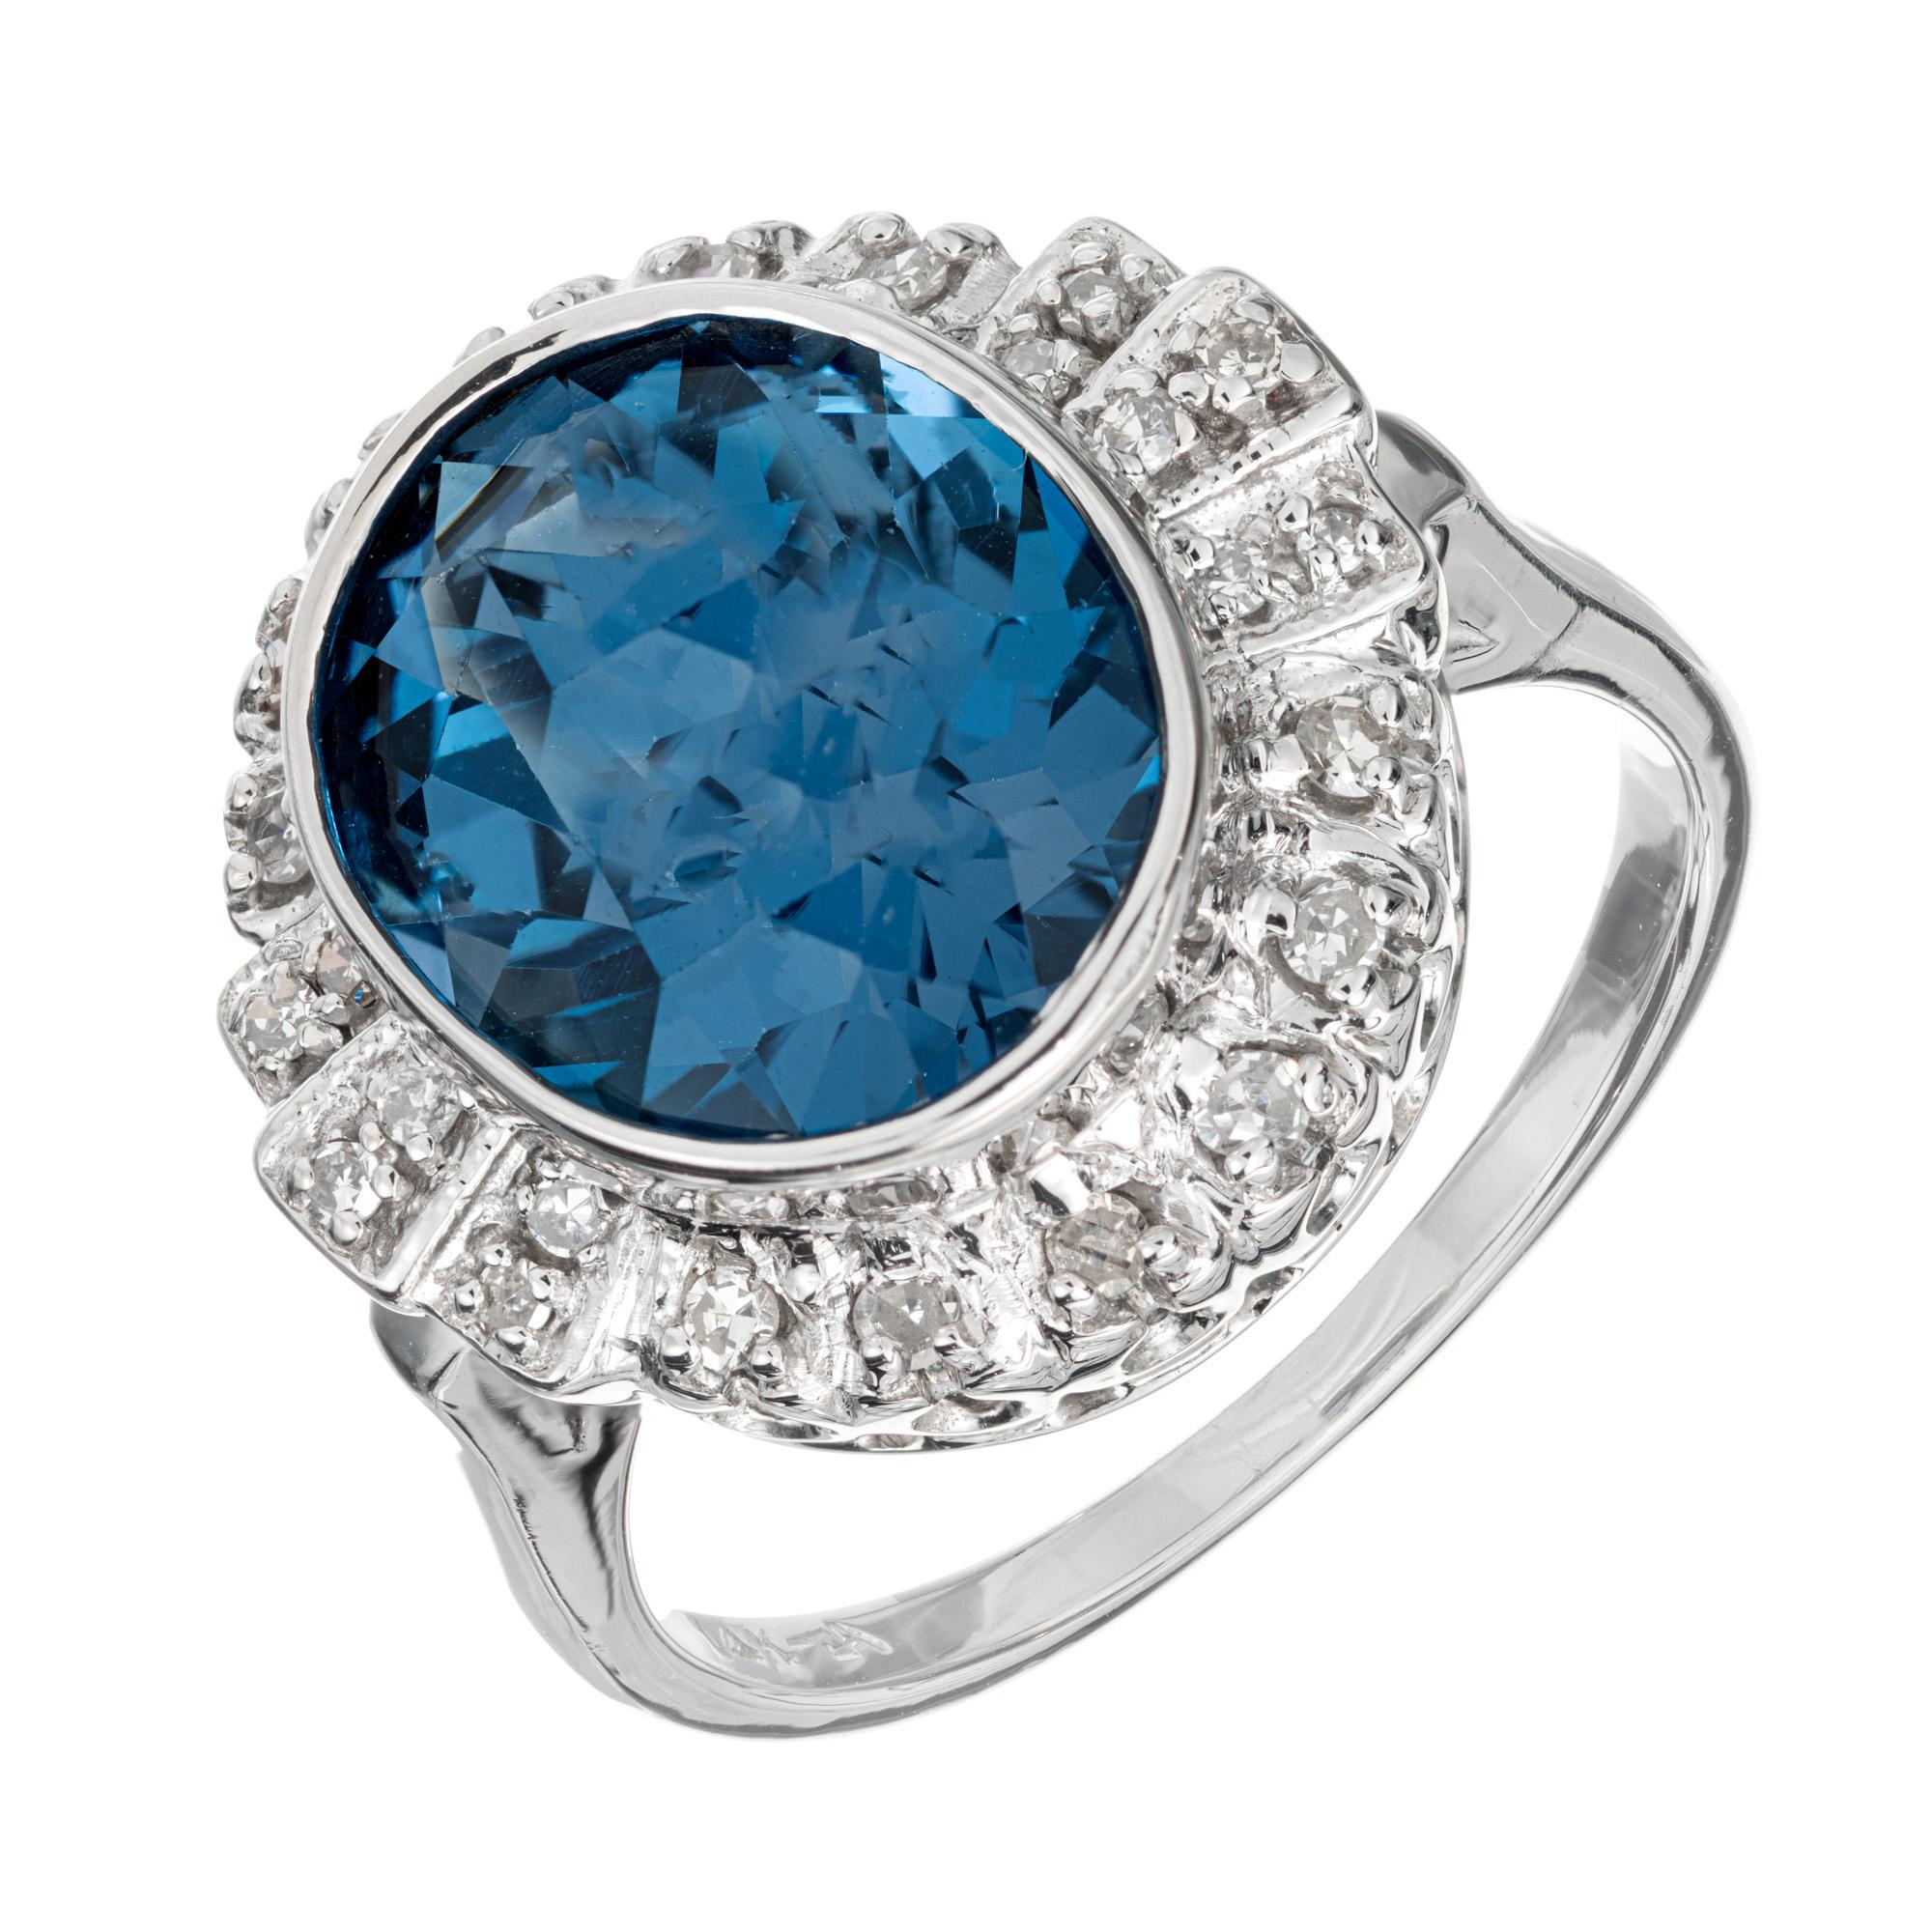 Topaz and Dimond ring. 4.20 Carat oval topaz with a halo of 24 round diamonds in a 14k white gold setting.  

1 oval blue topaz, approx. 4.20cts
24 round diamonds, H-I SI approx. .20cts
Size 6.75 and sizable
14k white gold
Stamped: 14k
6.4